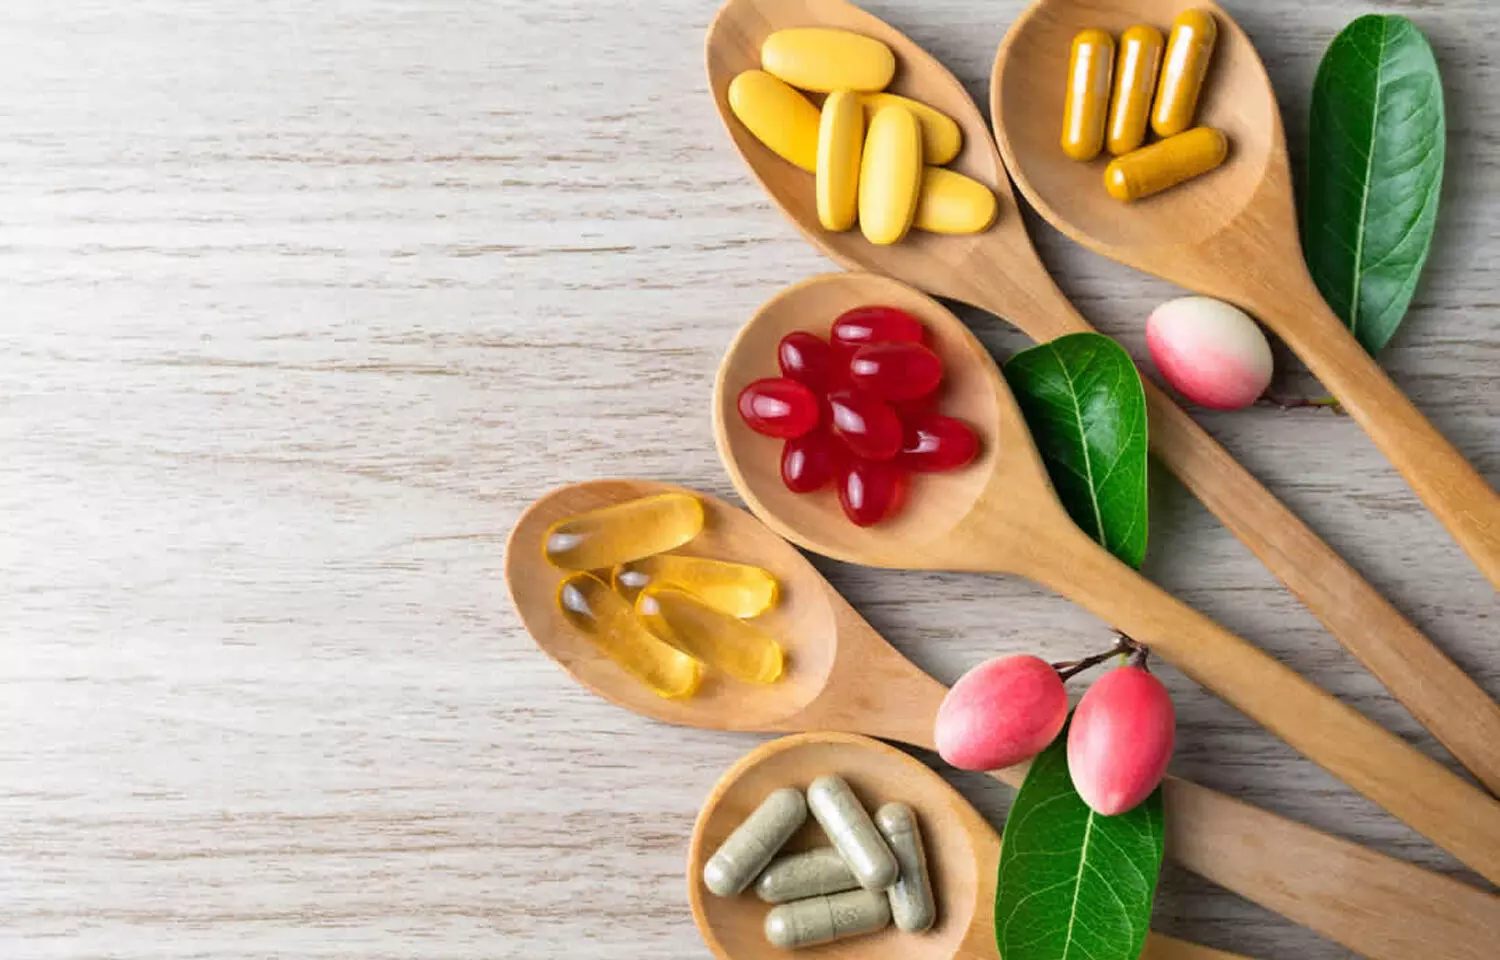 Multivitamins not effective for preventing cancer in elderly, study reveals